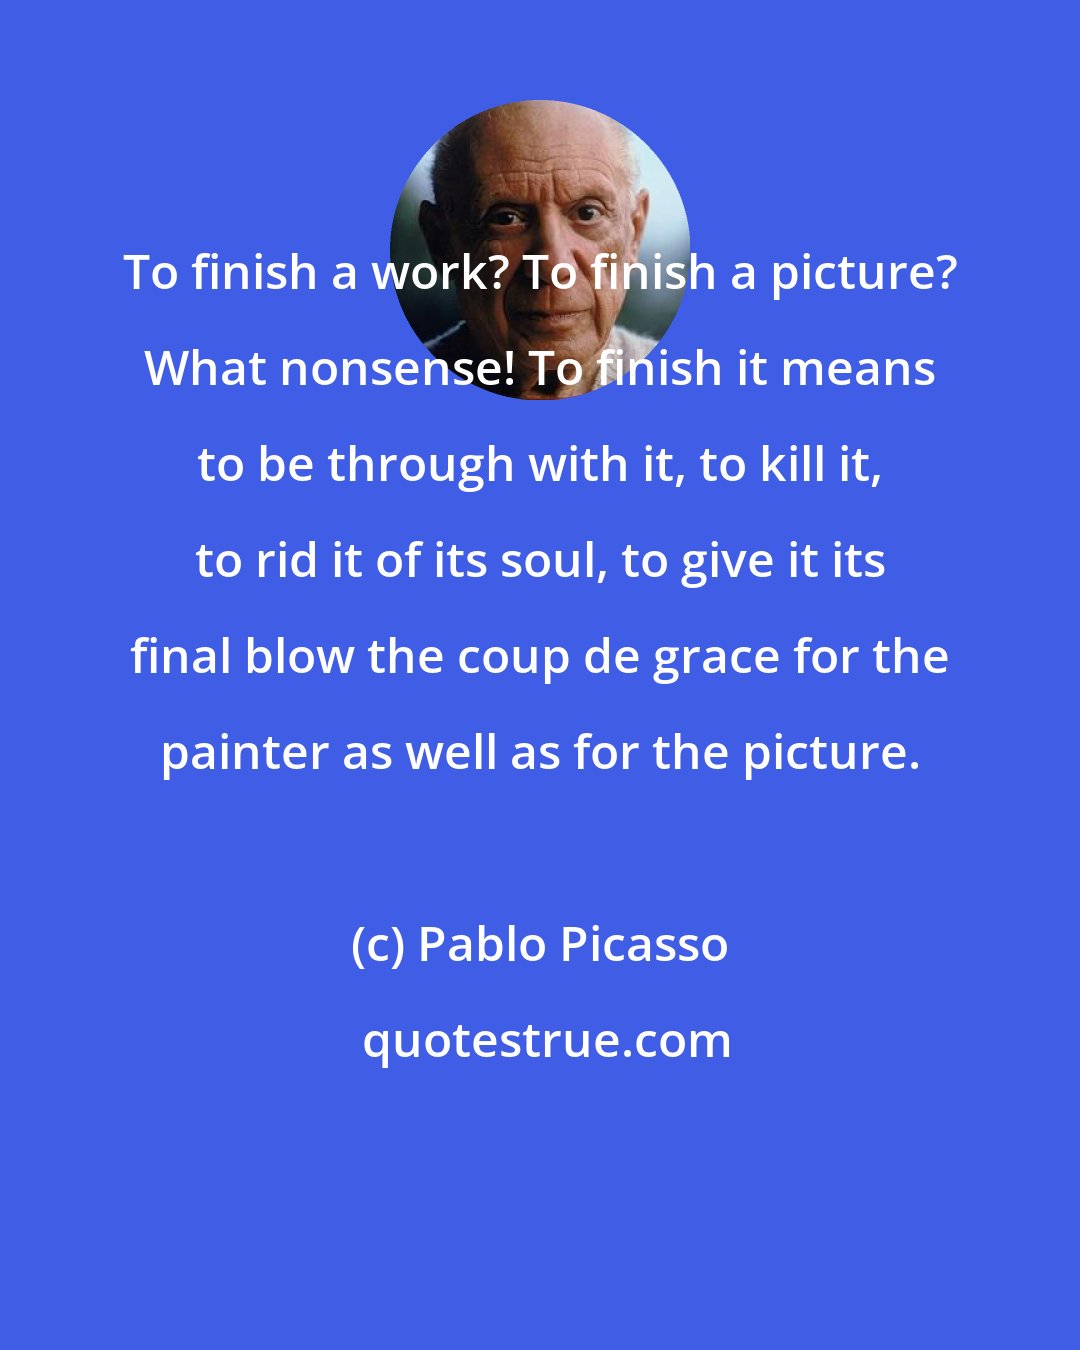 Pablo Picasso: To finish a work? To finish a picture? What nonsense! To finish it means to be through with it, to kill it, to rid it of its soul, to give it its final blow the coup de grace for the painter as well as for the picture.